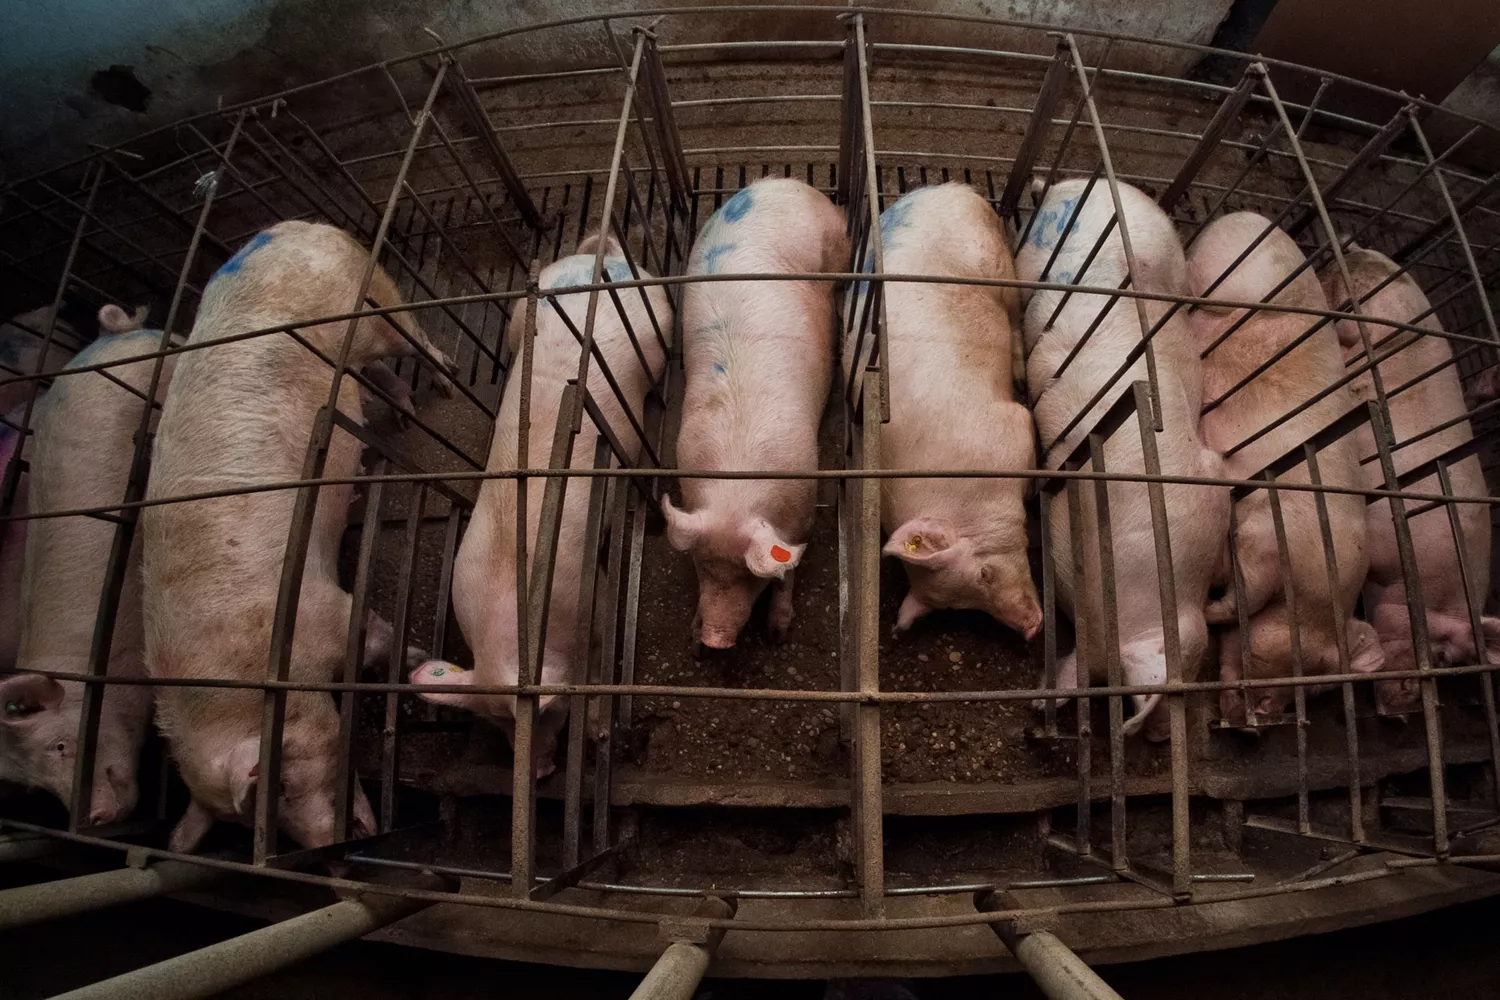 Row of pigs in cages.